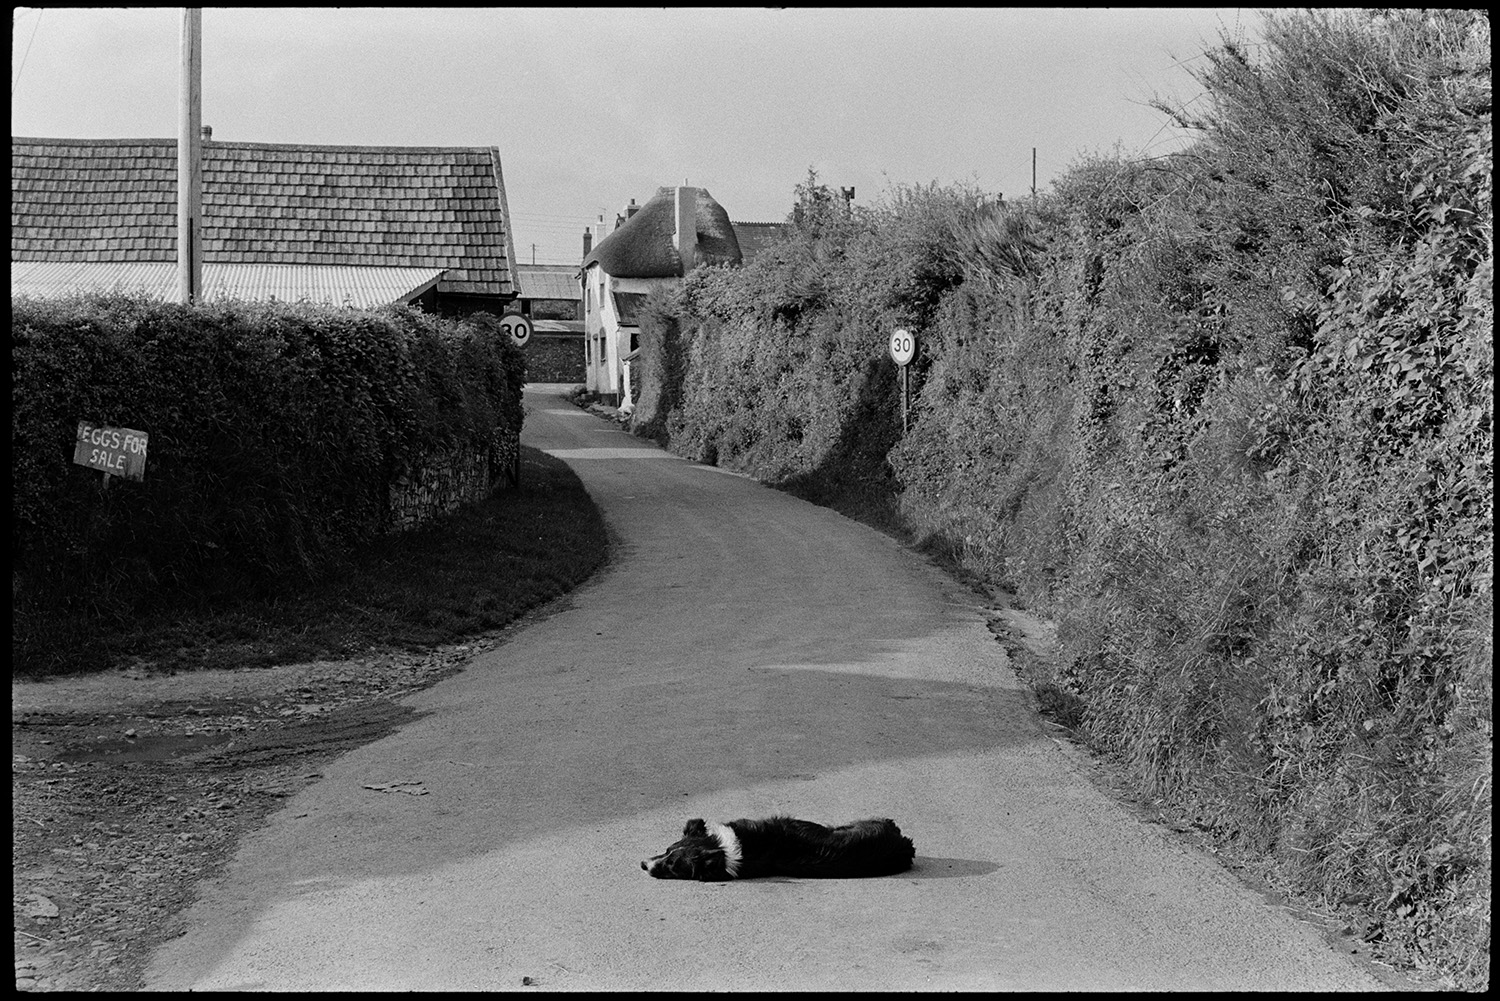 Scenes around village, comparison shots with old photos.
[A collie dog lying in the road next to an entrance, possibly to a farm, with an 